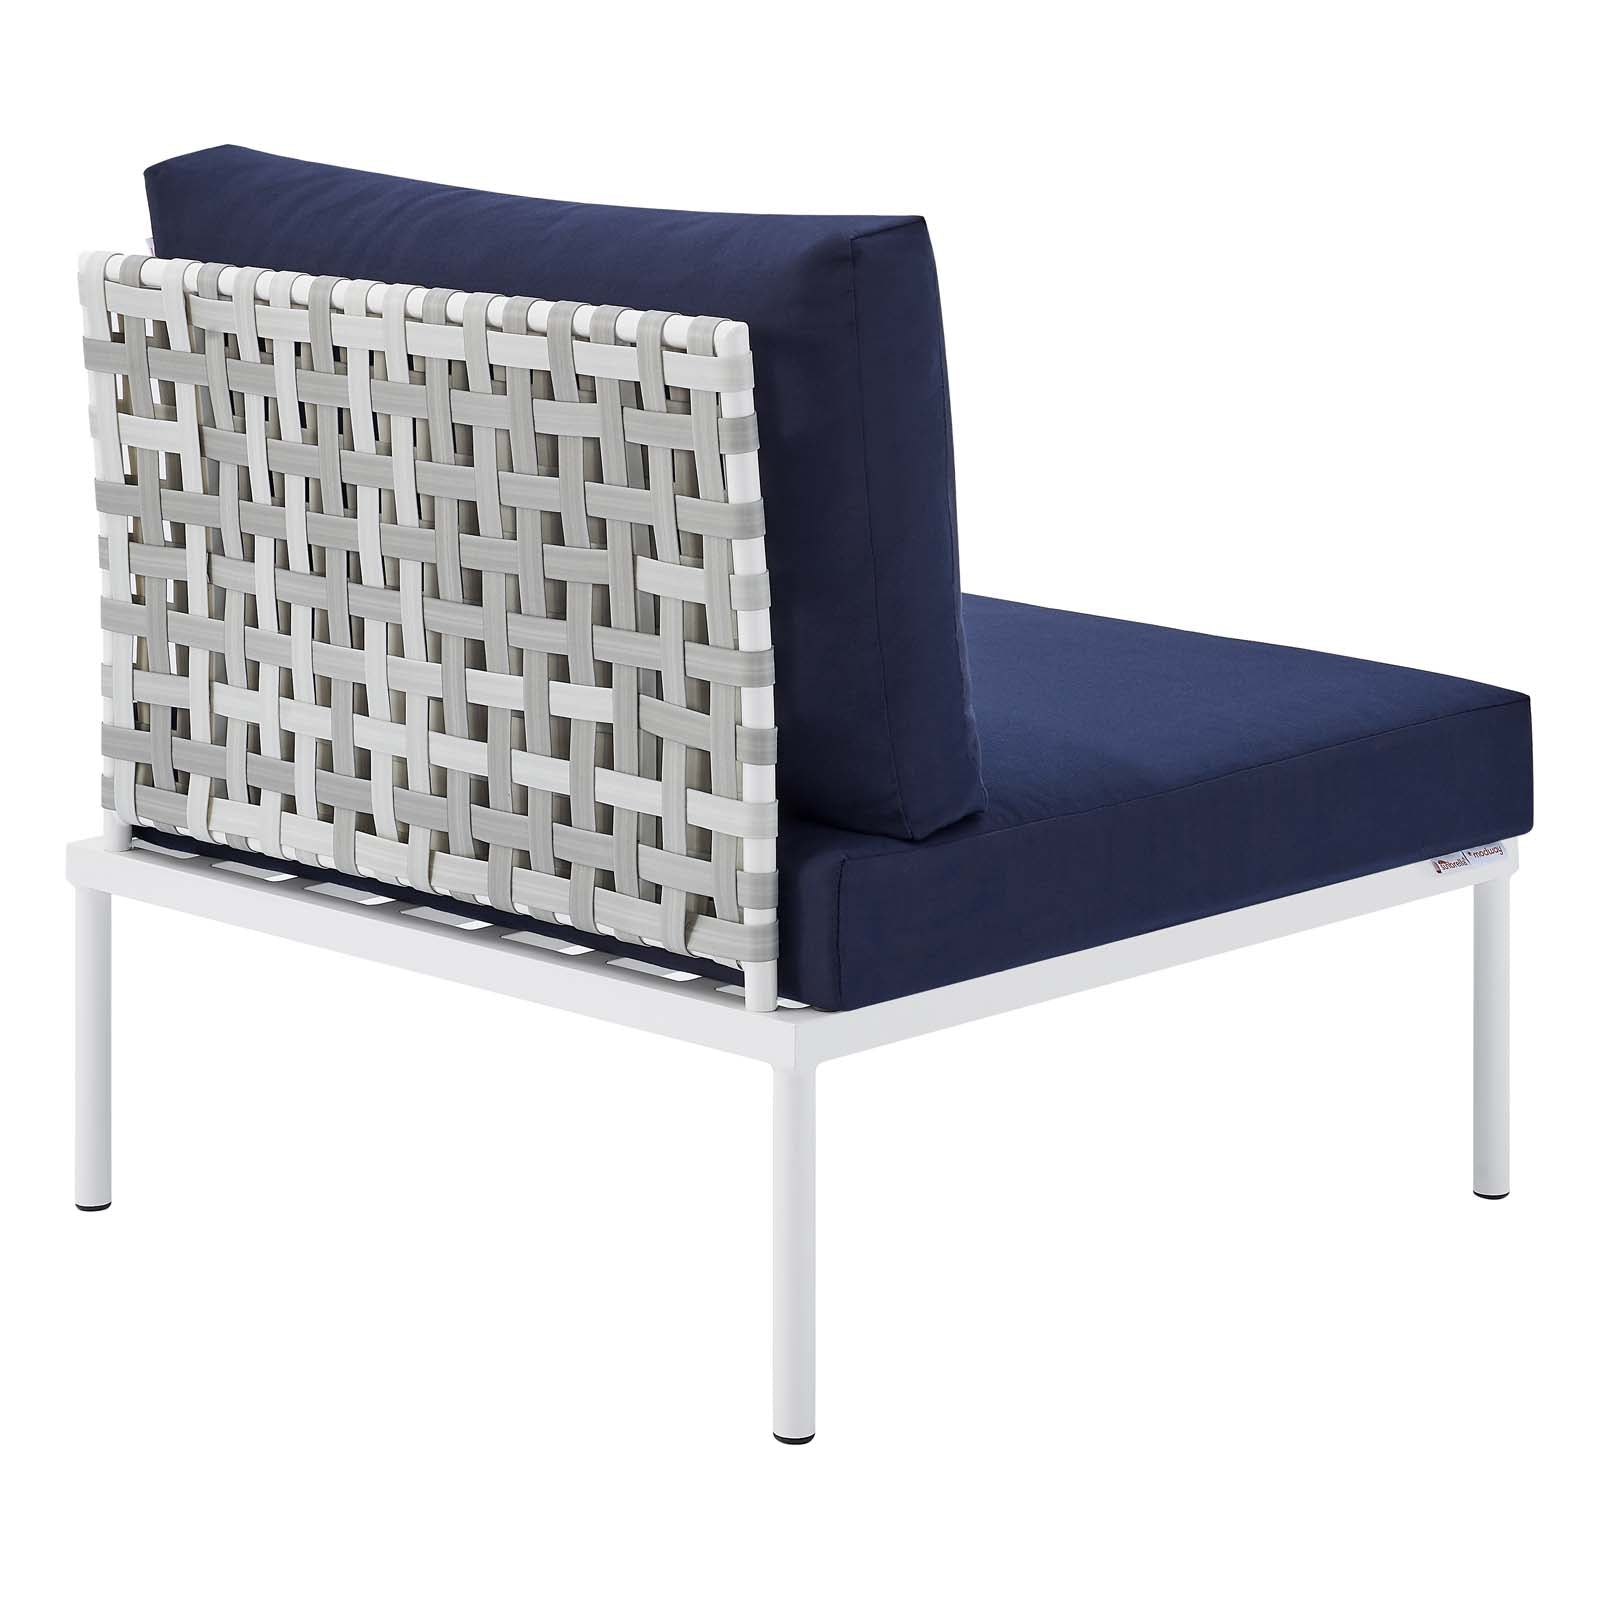 Modway Outdoor Chairs - Harmony Sunbrella Basket Weave Outdoor Patio Aluminum Armless Chair Taupe Navy